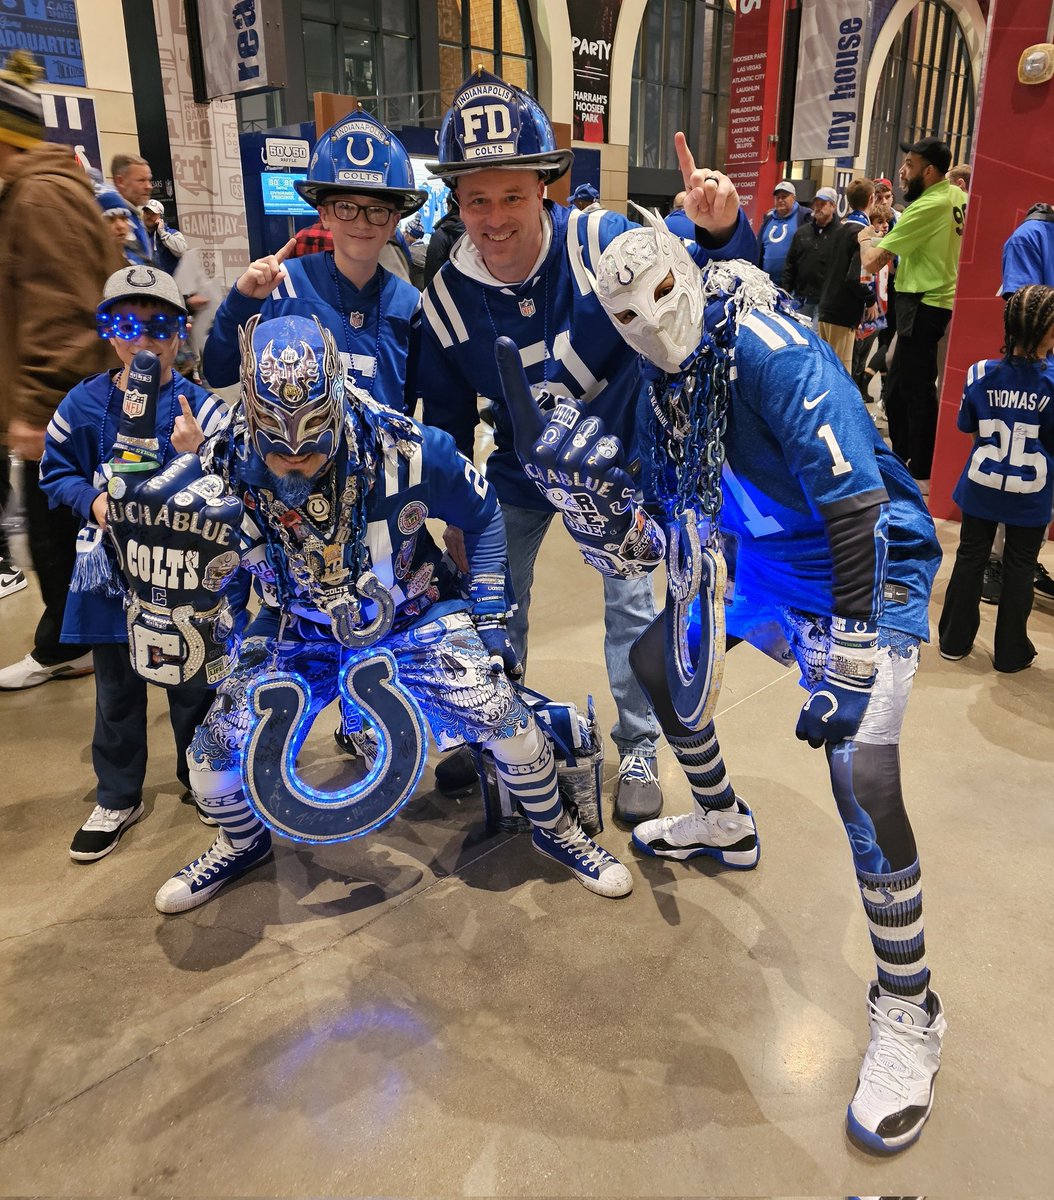 We are home at @LucasOilStadium .  Lets go get a win @Colts Nation!
Lets GOOOOOOO!!!!!!!!
@ColtsLife @coltscommunity #ForTheShoe    @JimIrsay #LuchaBlue #HOUvsIND